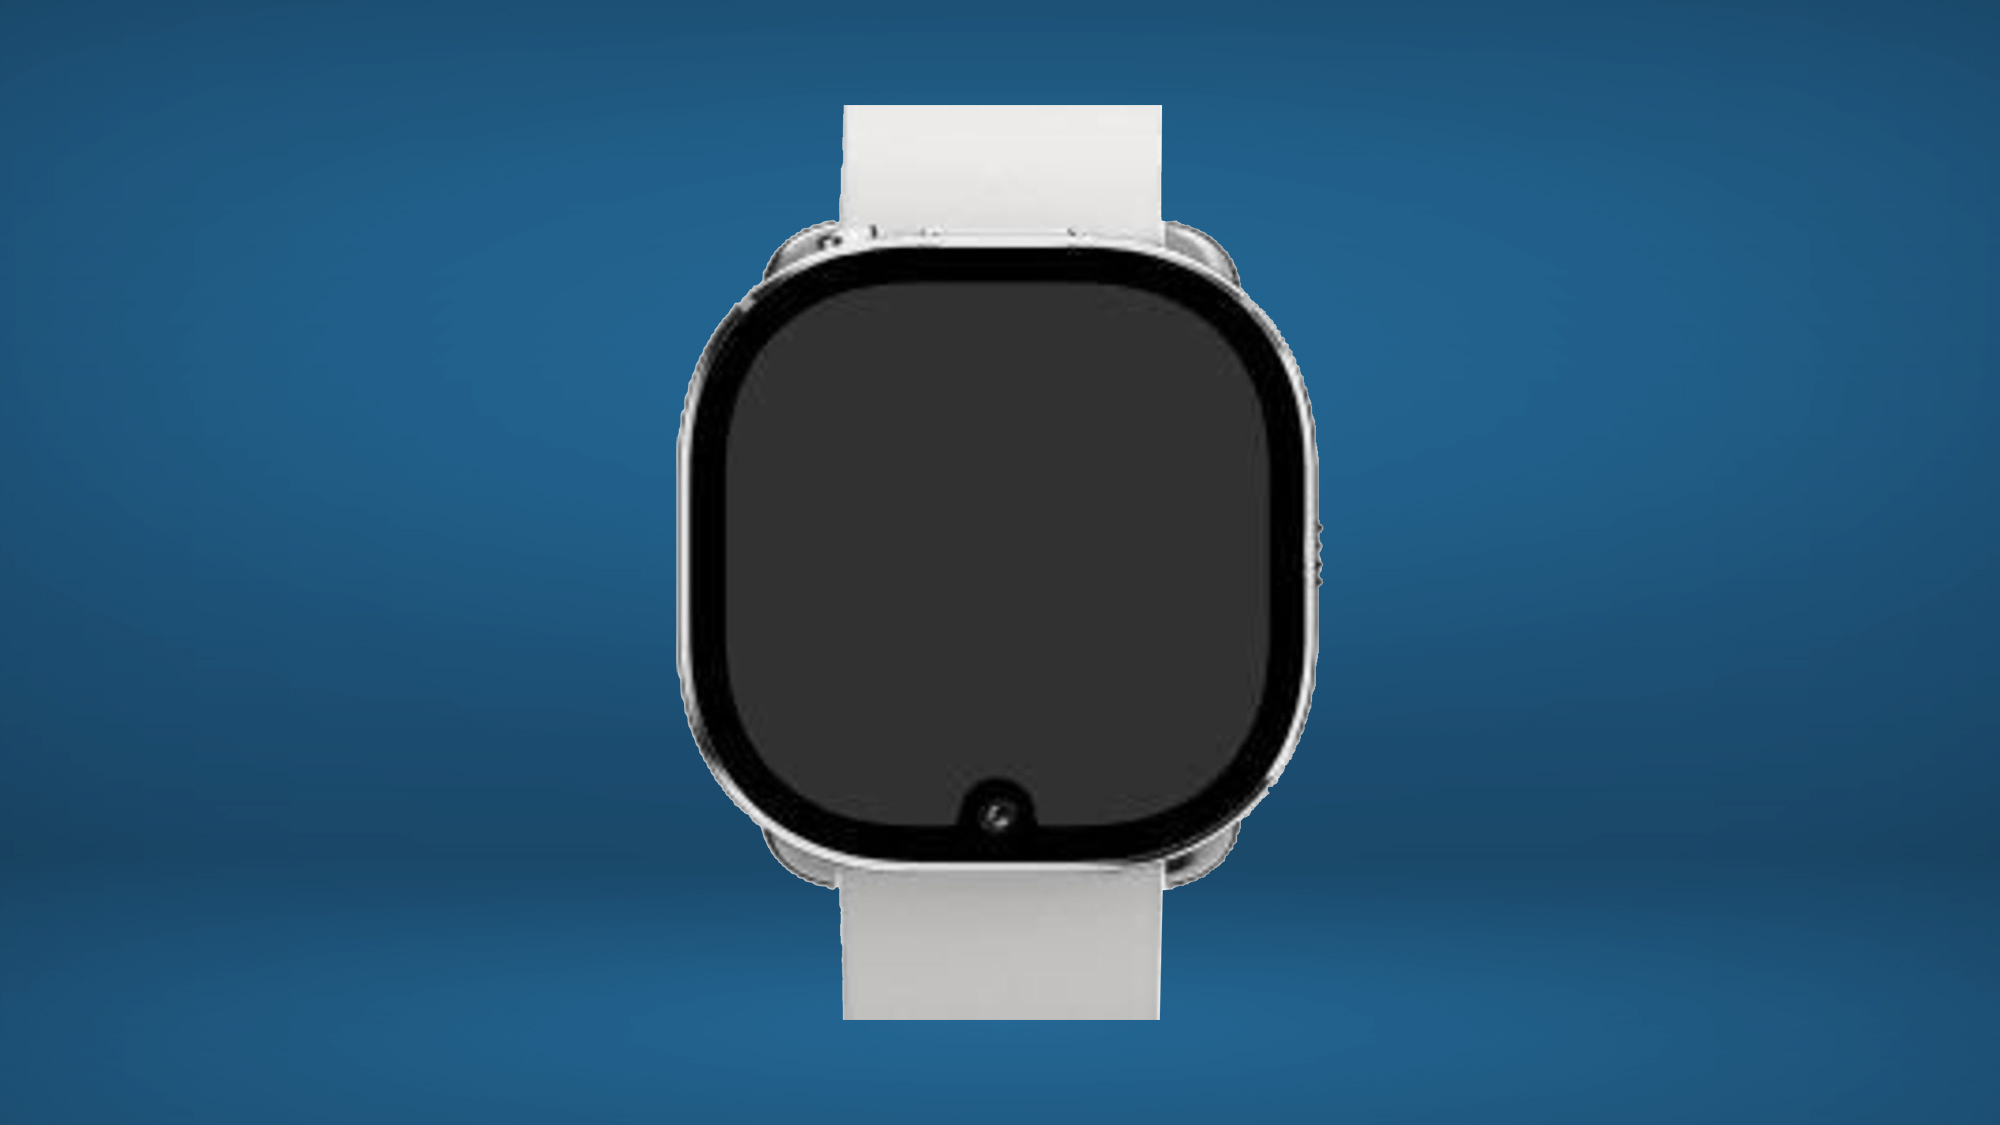 facebook/meta watch leaked design with camera notch on blue background